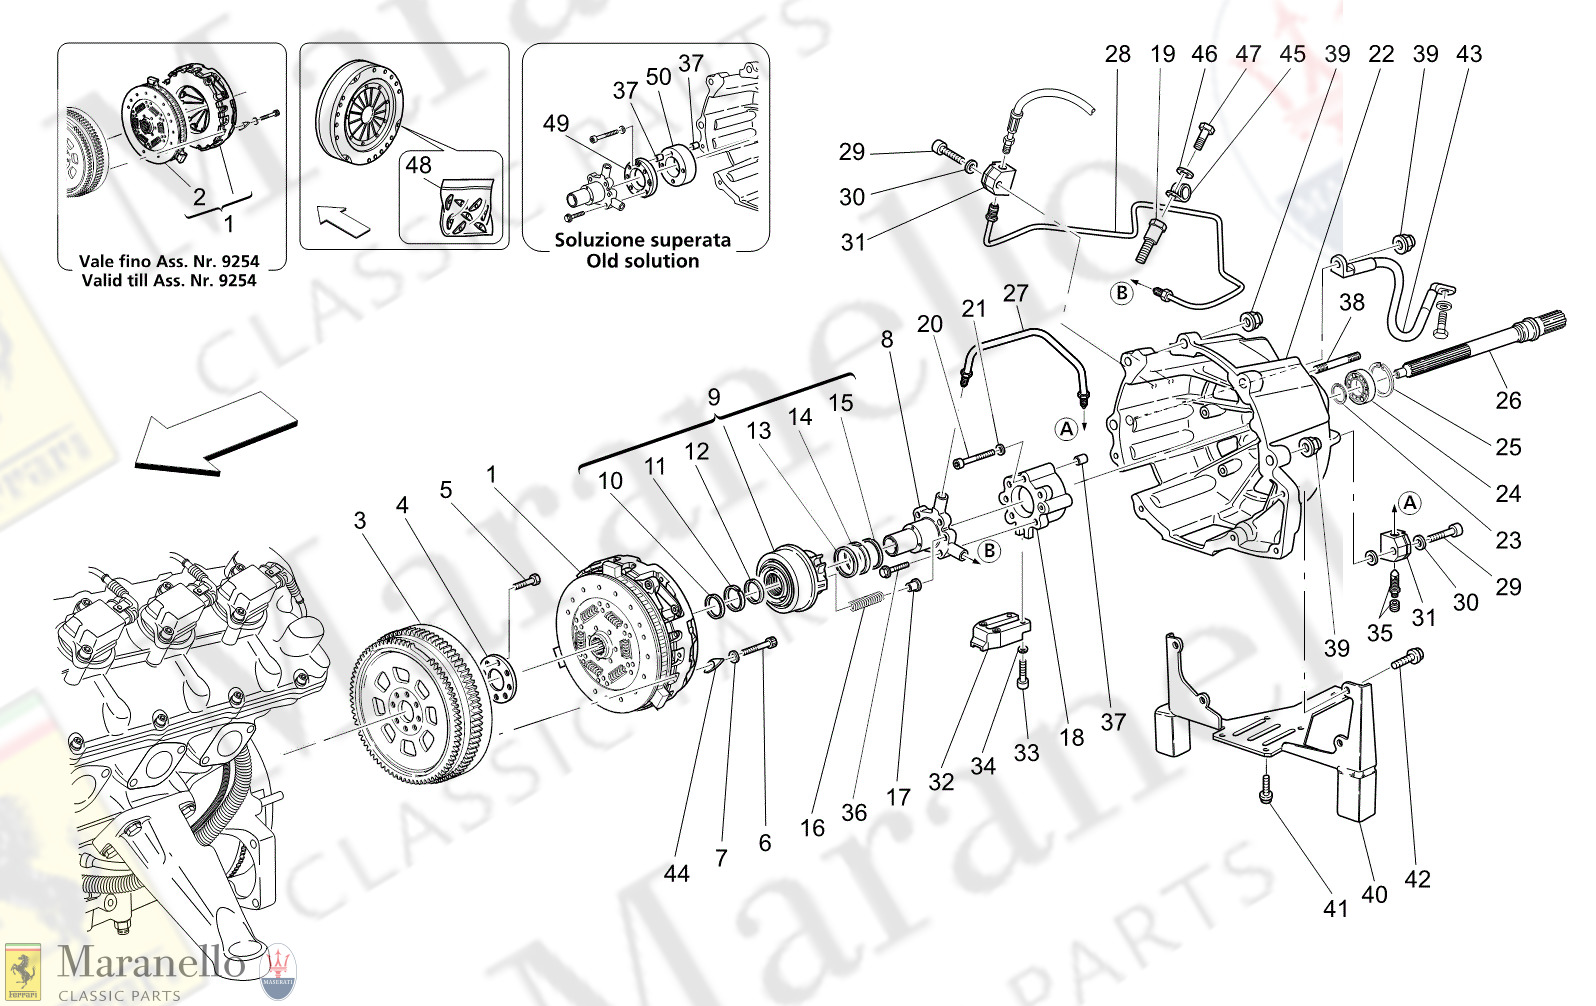 M2.10 - 11 - M210 - 11 Clutch Discs And Housing For Mechanical Gearbox